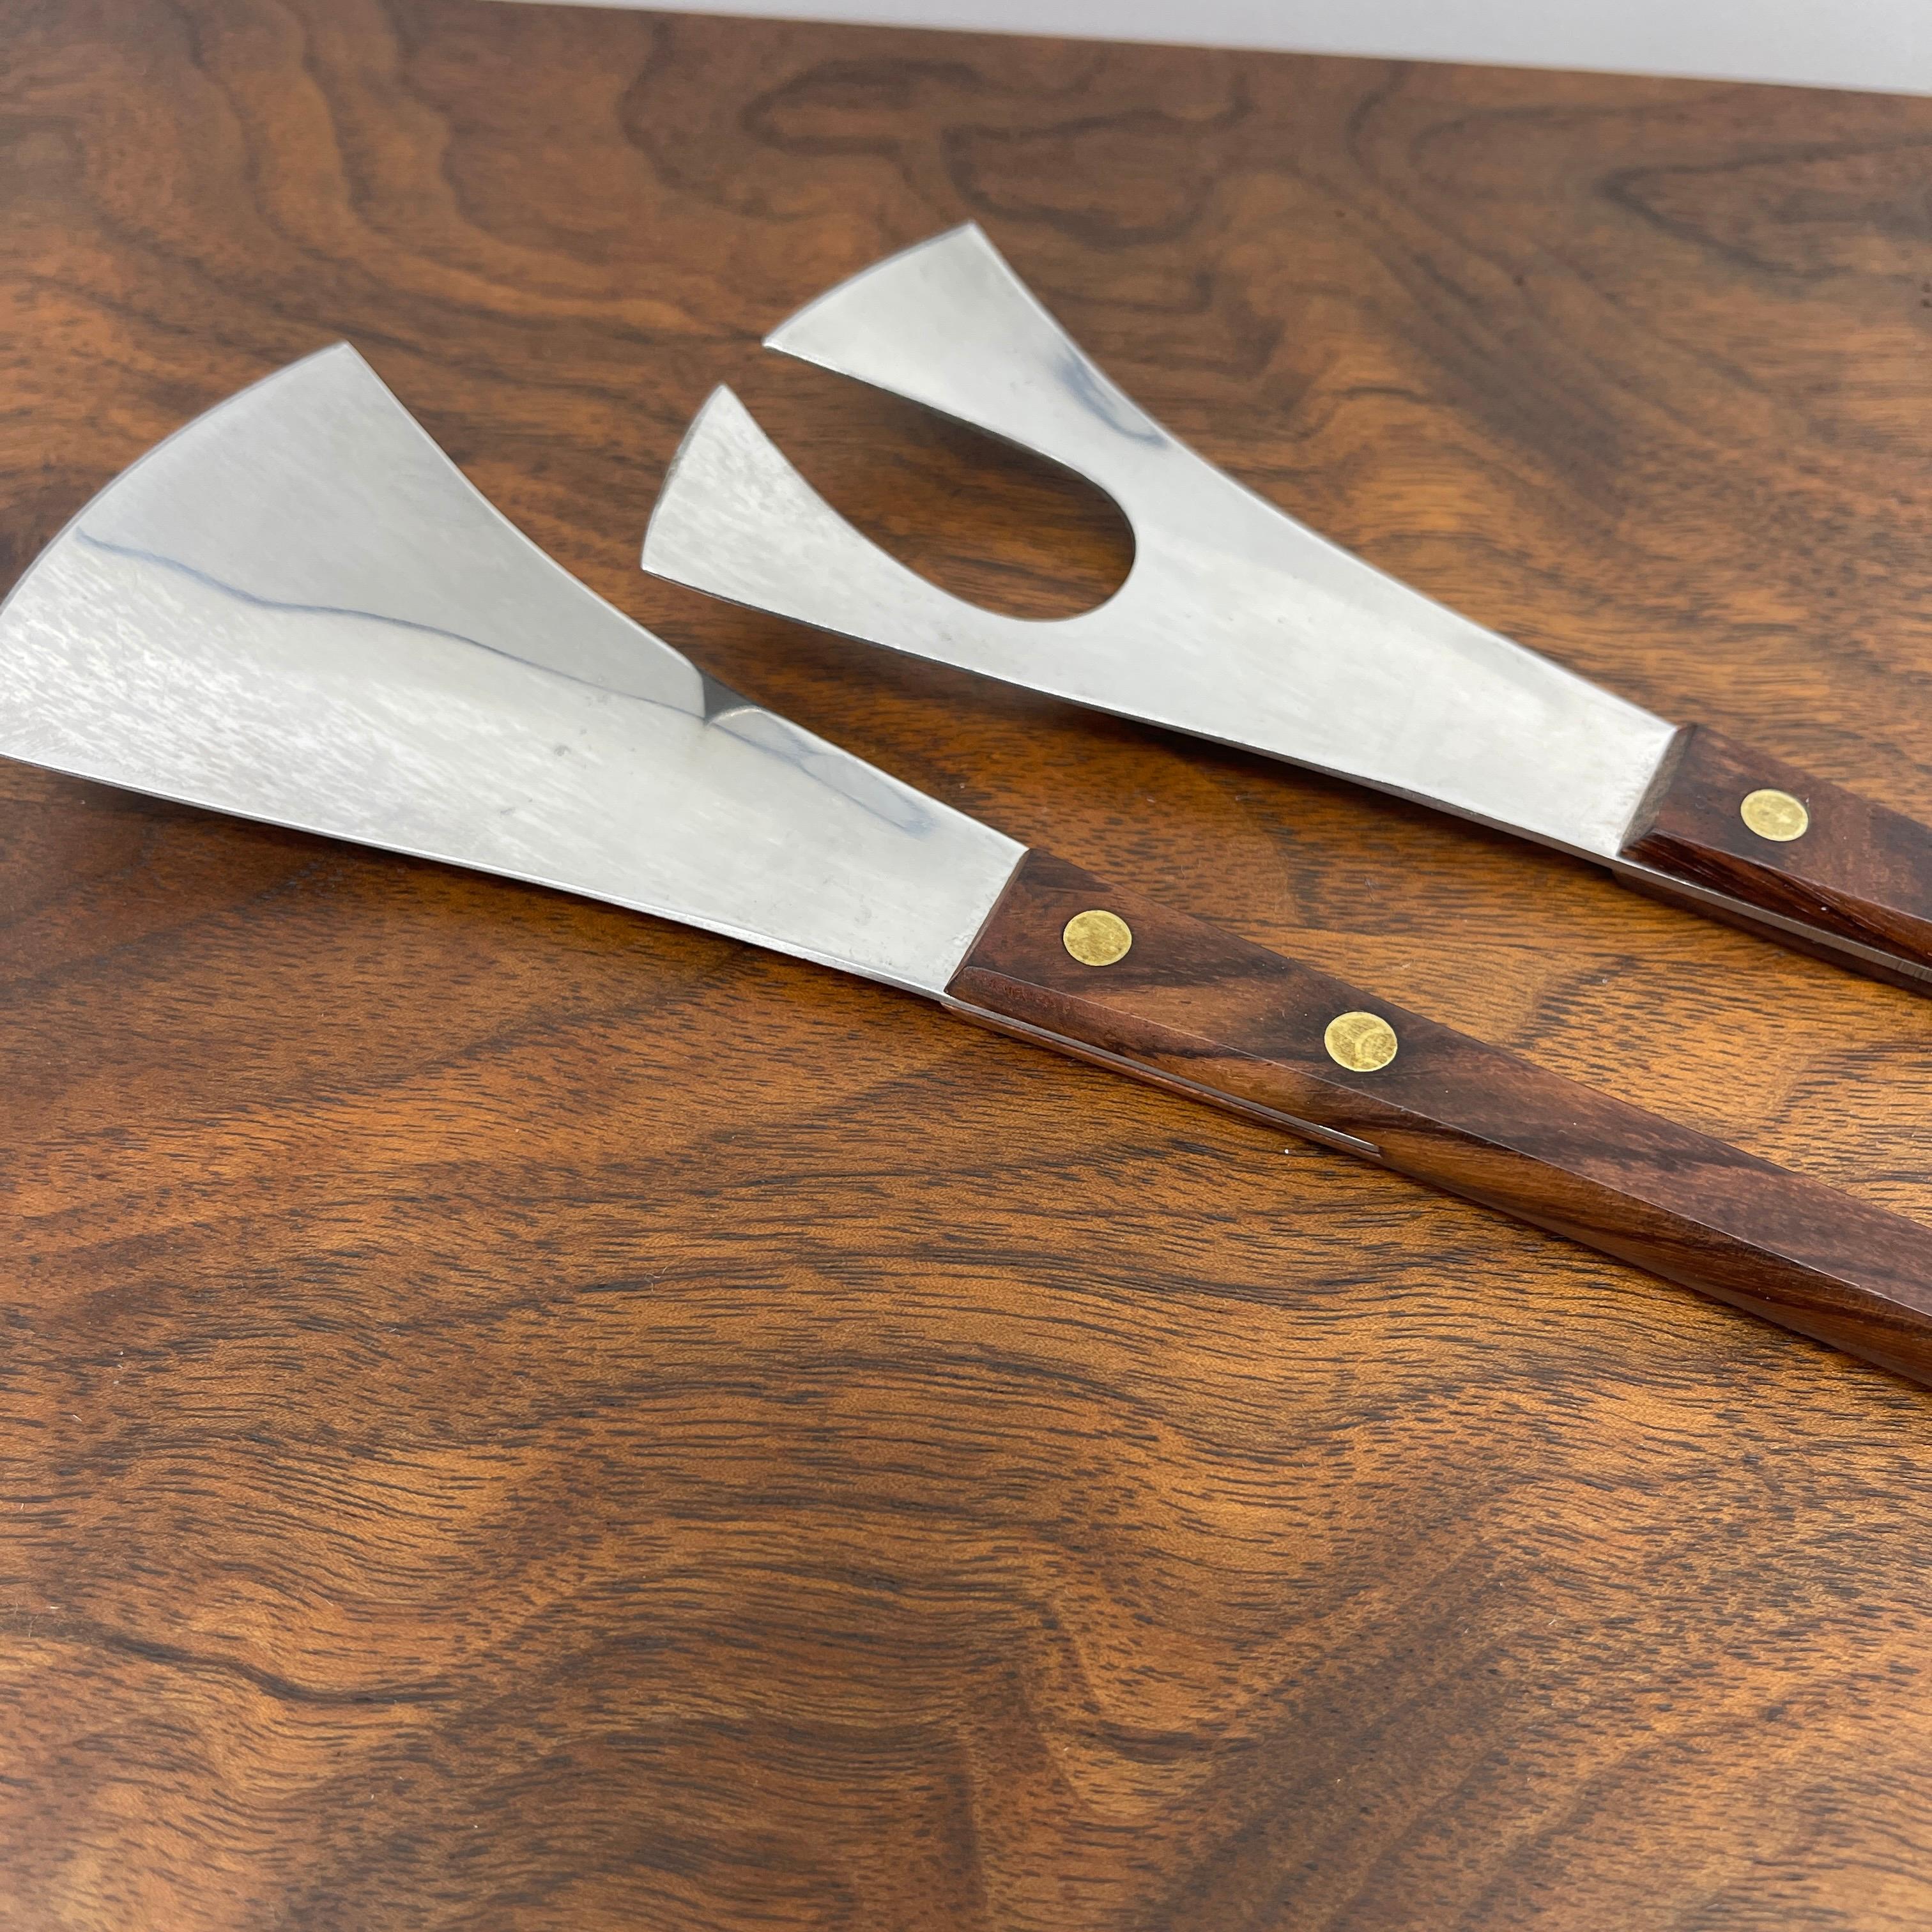 Mid-Century Modern rosewood and stainless steel salad tong set.
Made in Denmark, this slender, elegant pair of tongs will grace your table either serving salad or pasta. Classic Danish design, the wood is warm; beautiful and functional set for